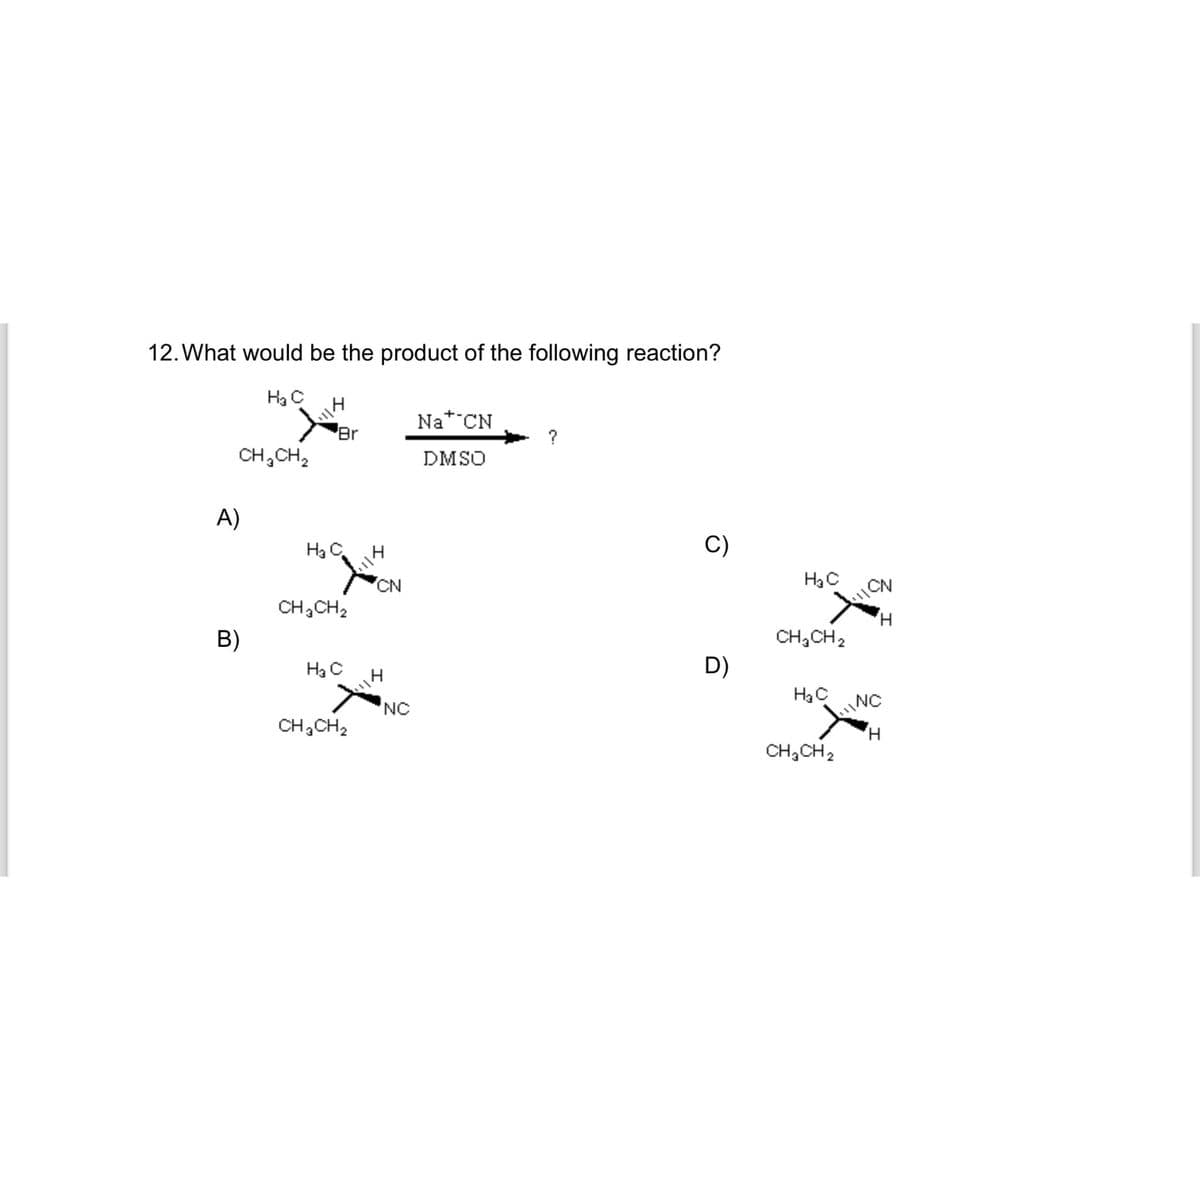 12. What would be the product of the following reaction?
H₂ C
CH₂CH₂
A)
B)
Br
H₂ C
CH3CH₂
H₂ C
CH₂CH₂
CN
14
NC
Nat CN
DMSO
?
C)
D)
H₂C
CH₂CH₂
H₂C
CH₂CH₂
11CN
H
INC
H